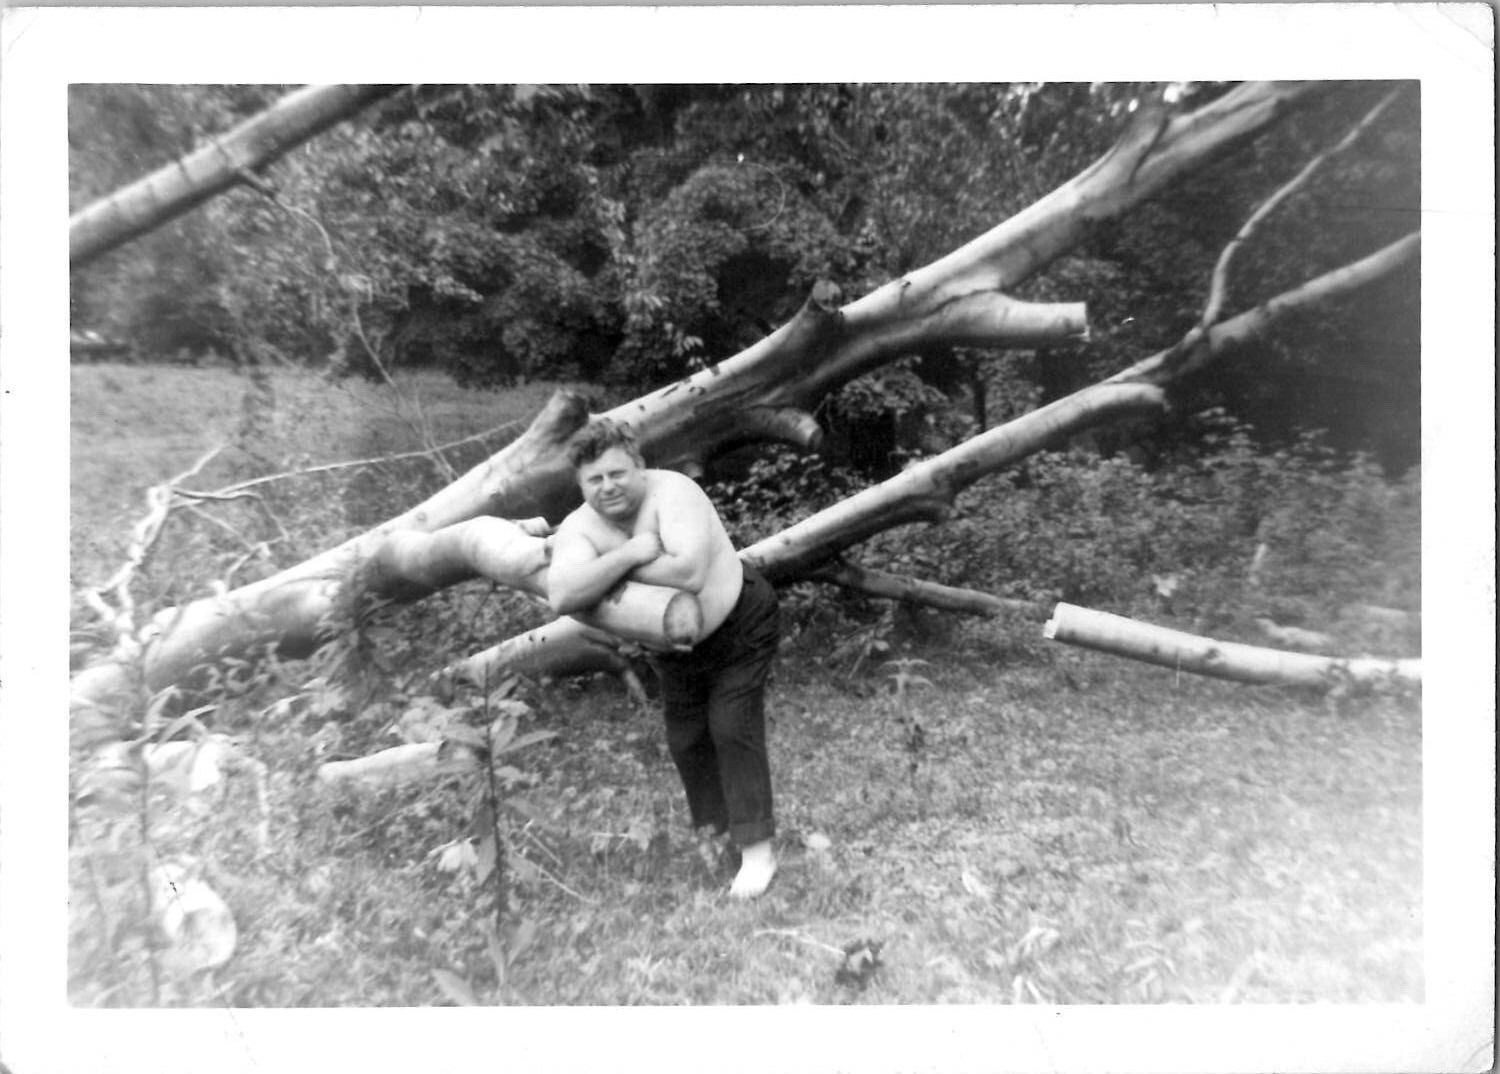 Beefcake Fat Shirtless Strong Man Knocked Tree Down 1940s Vintage Photo Gay Int